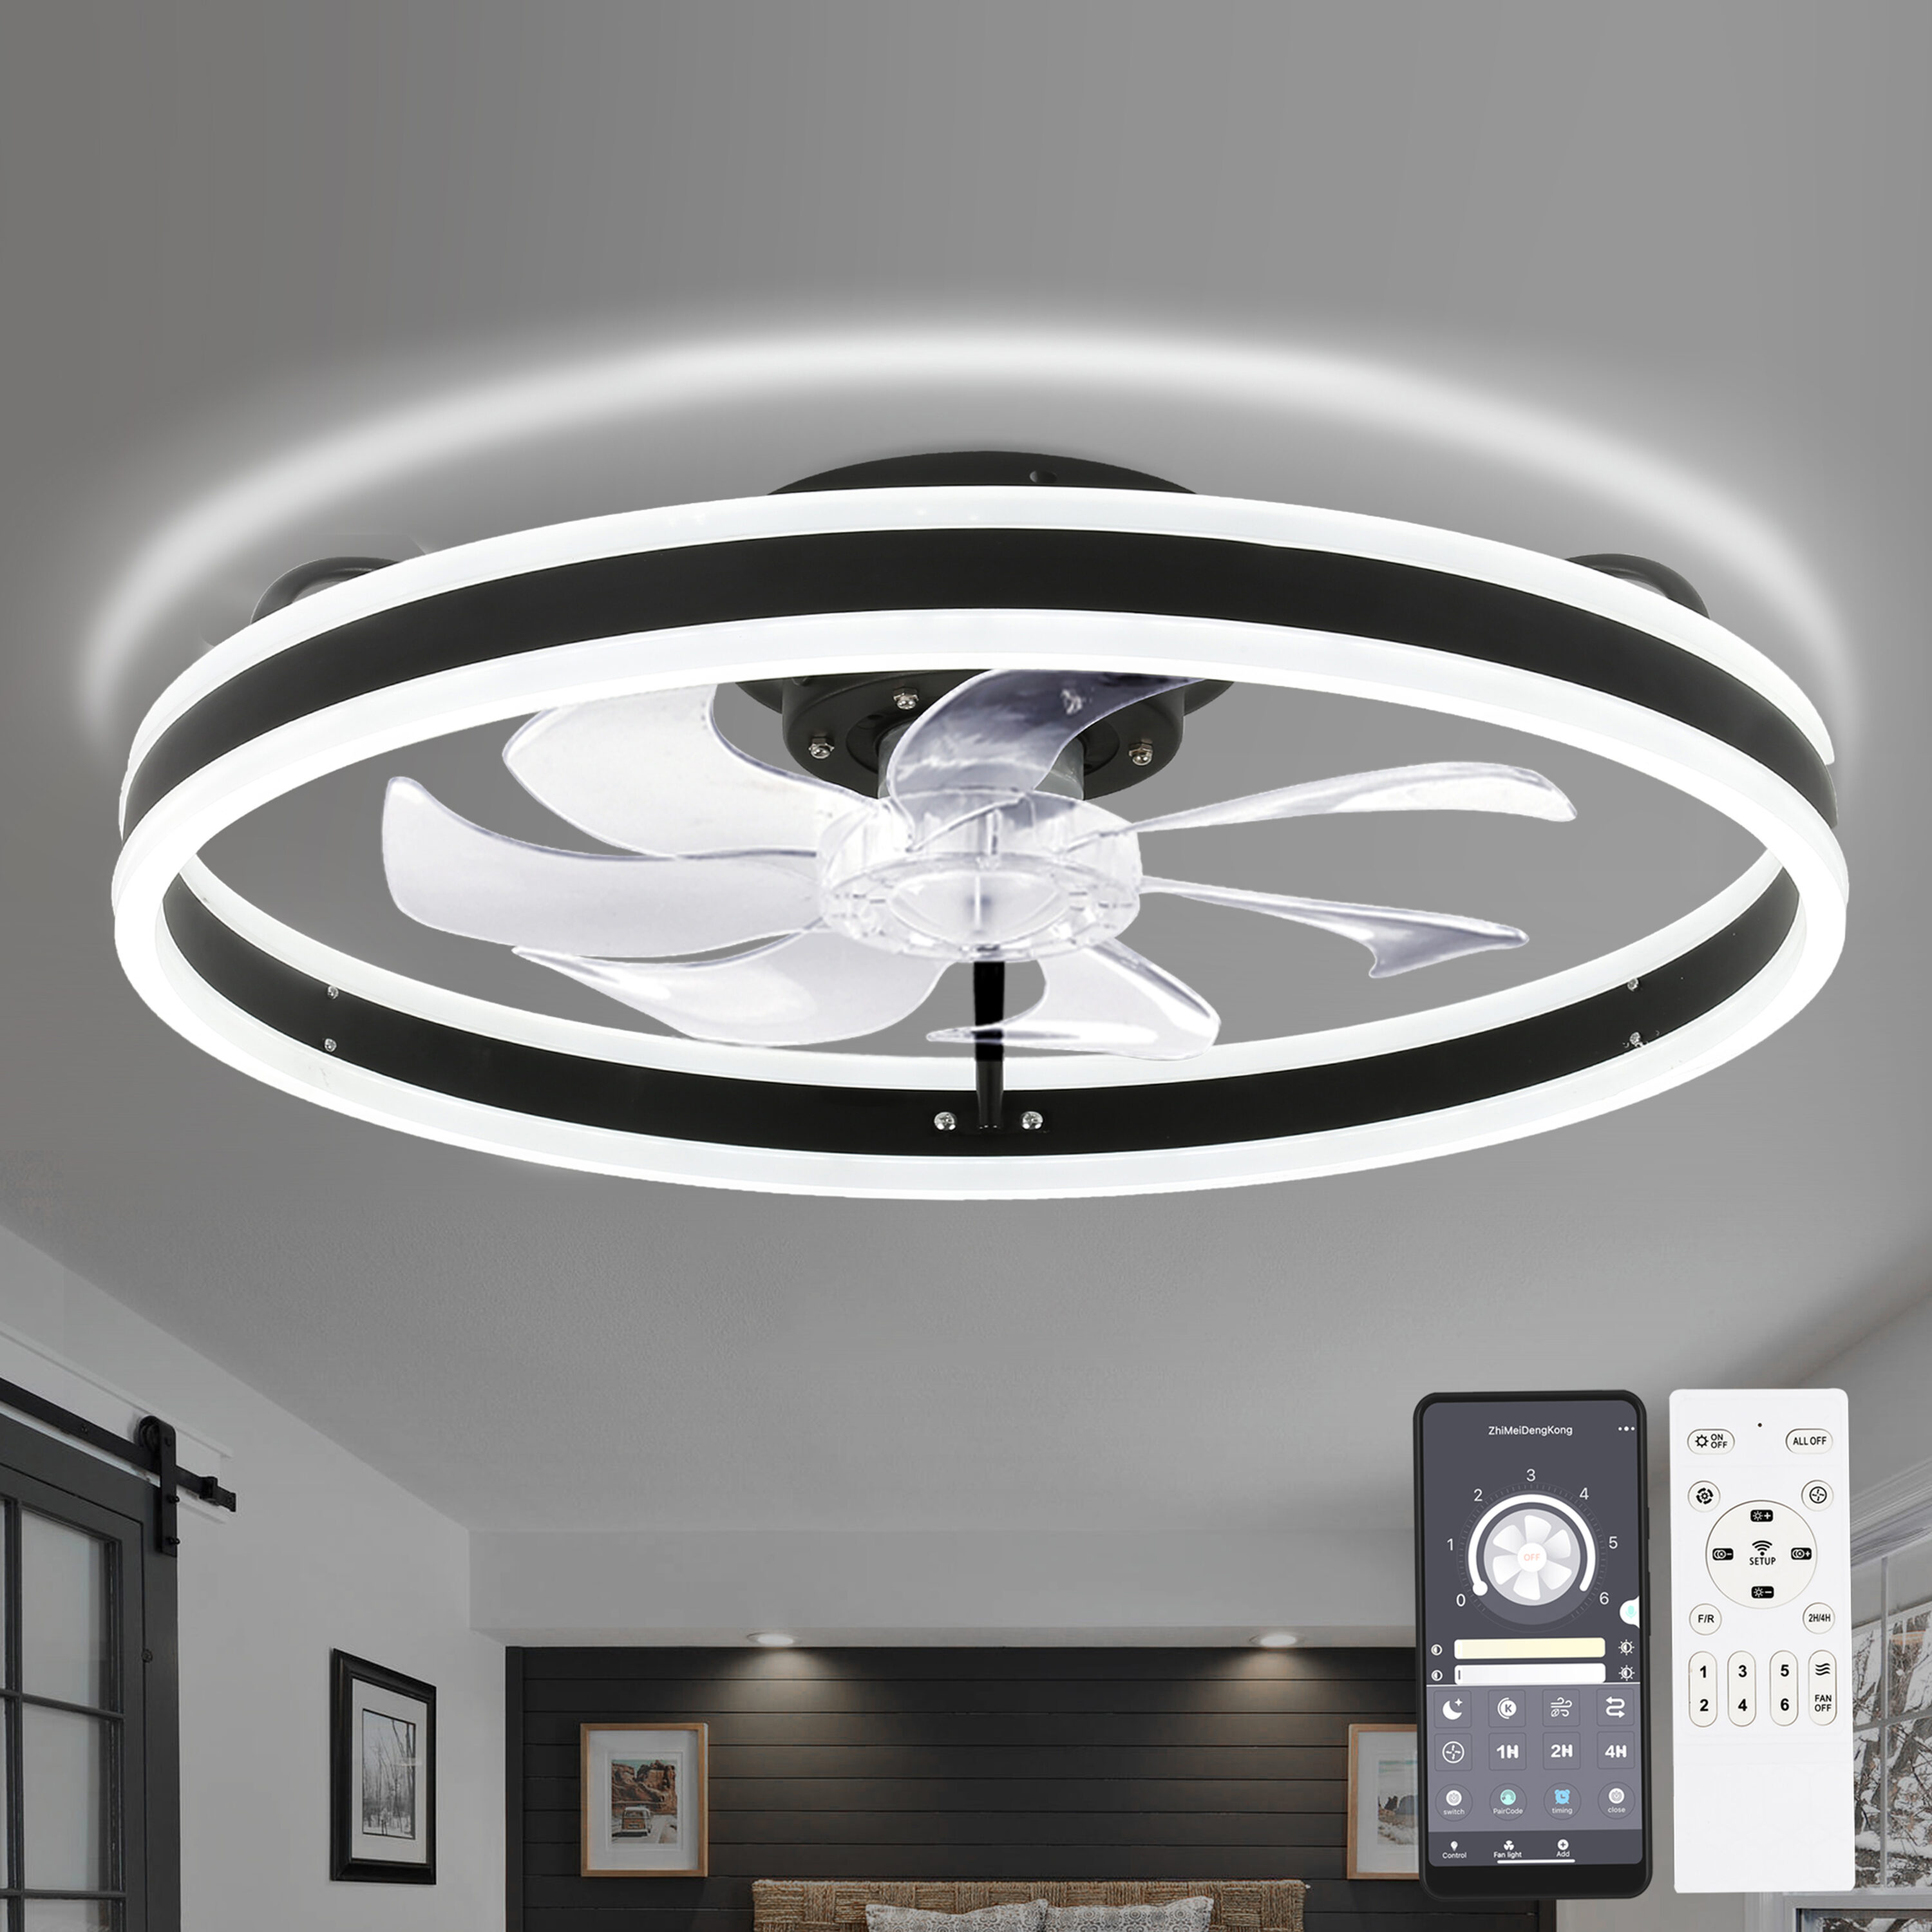 How To Install A Flush Mount Ceiling Fan